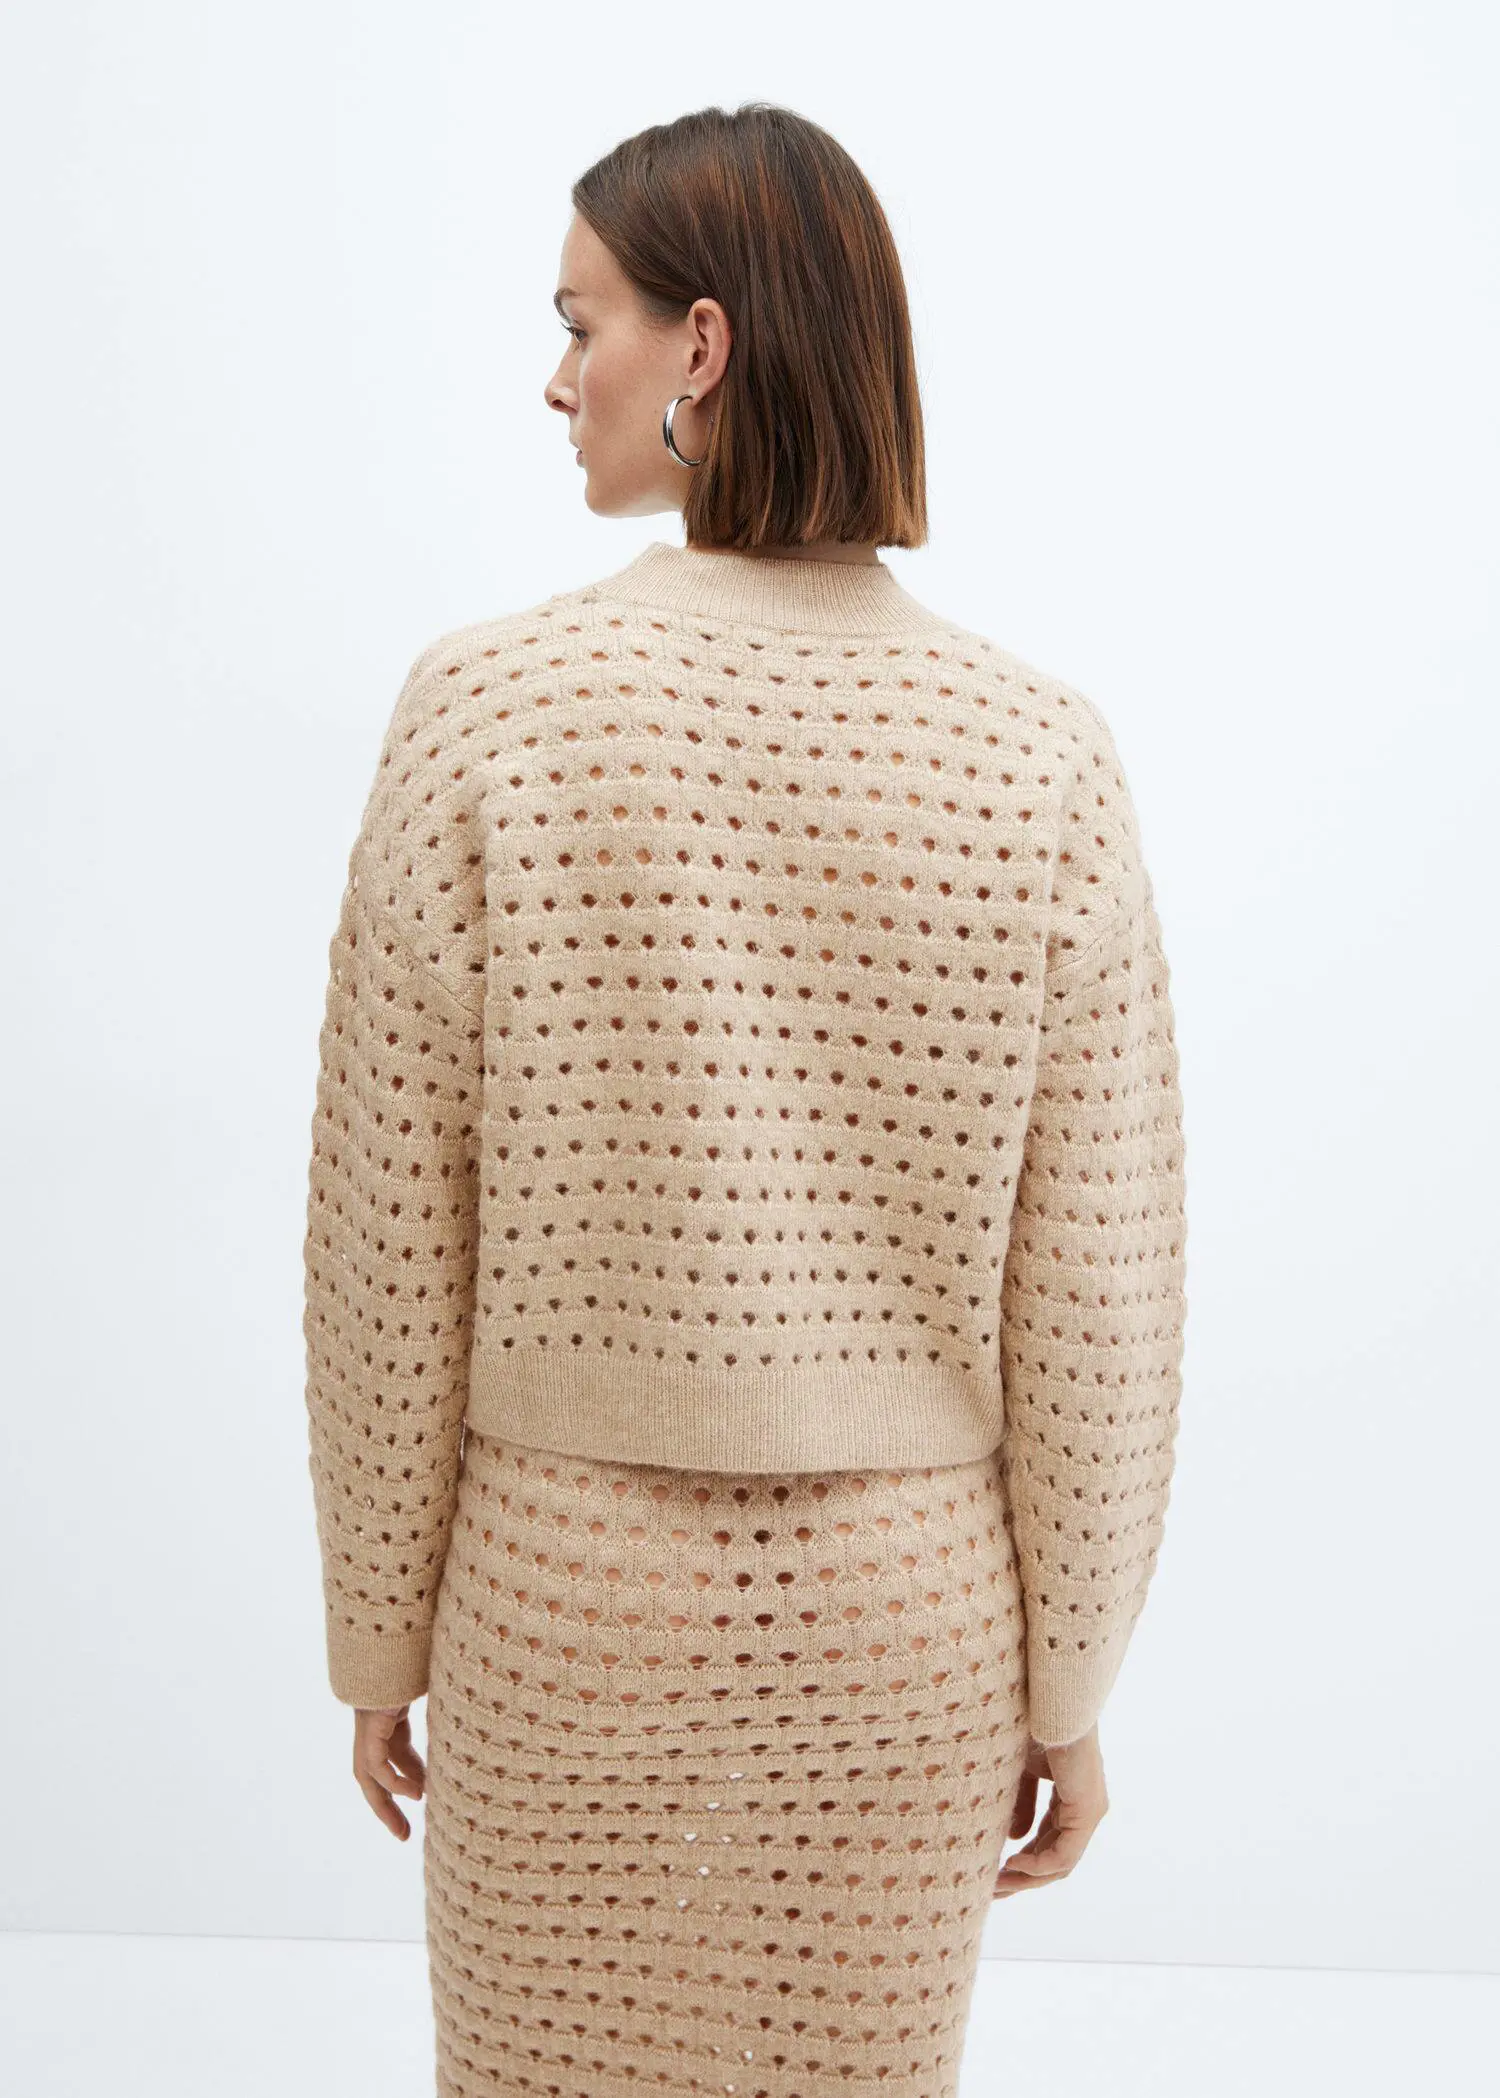 Mango Knitted sweater with openwork details. 3